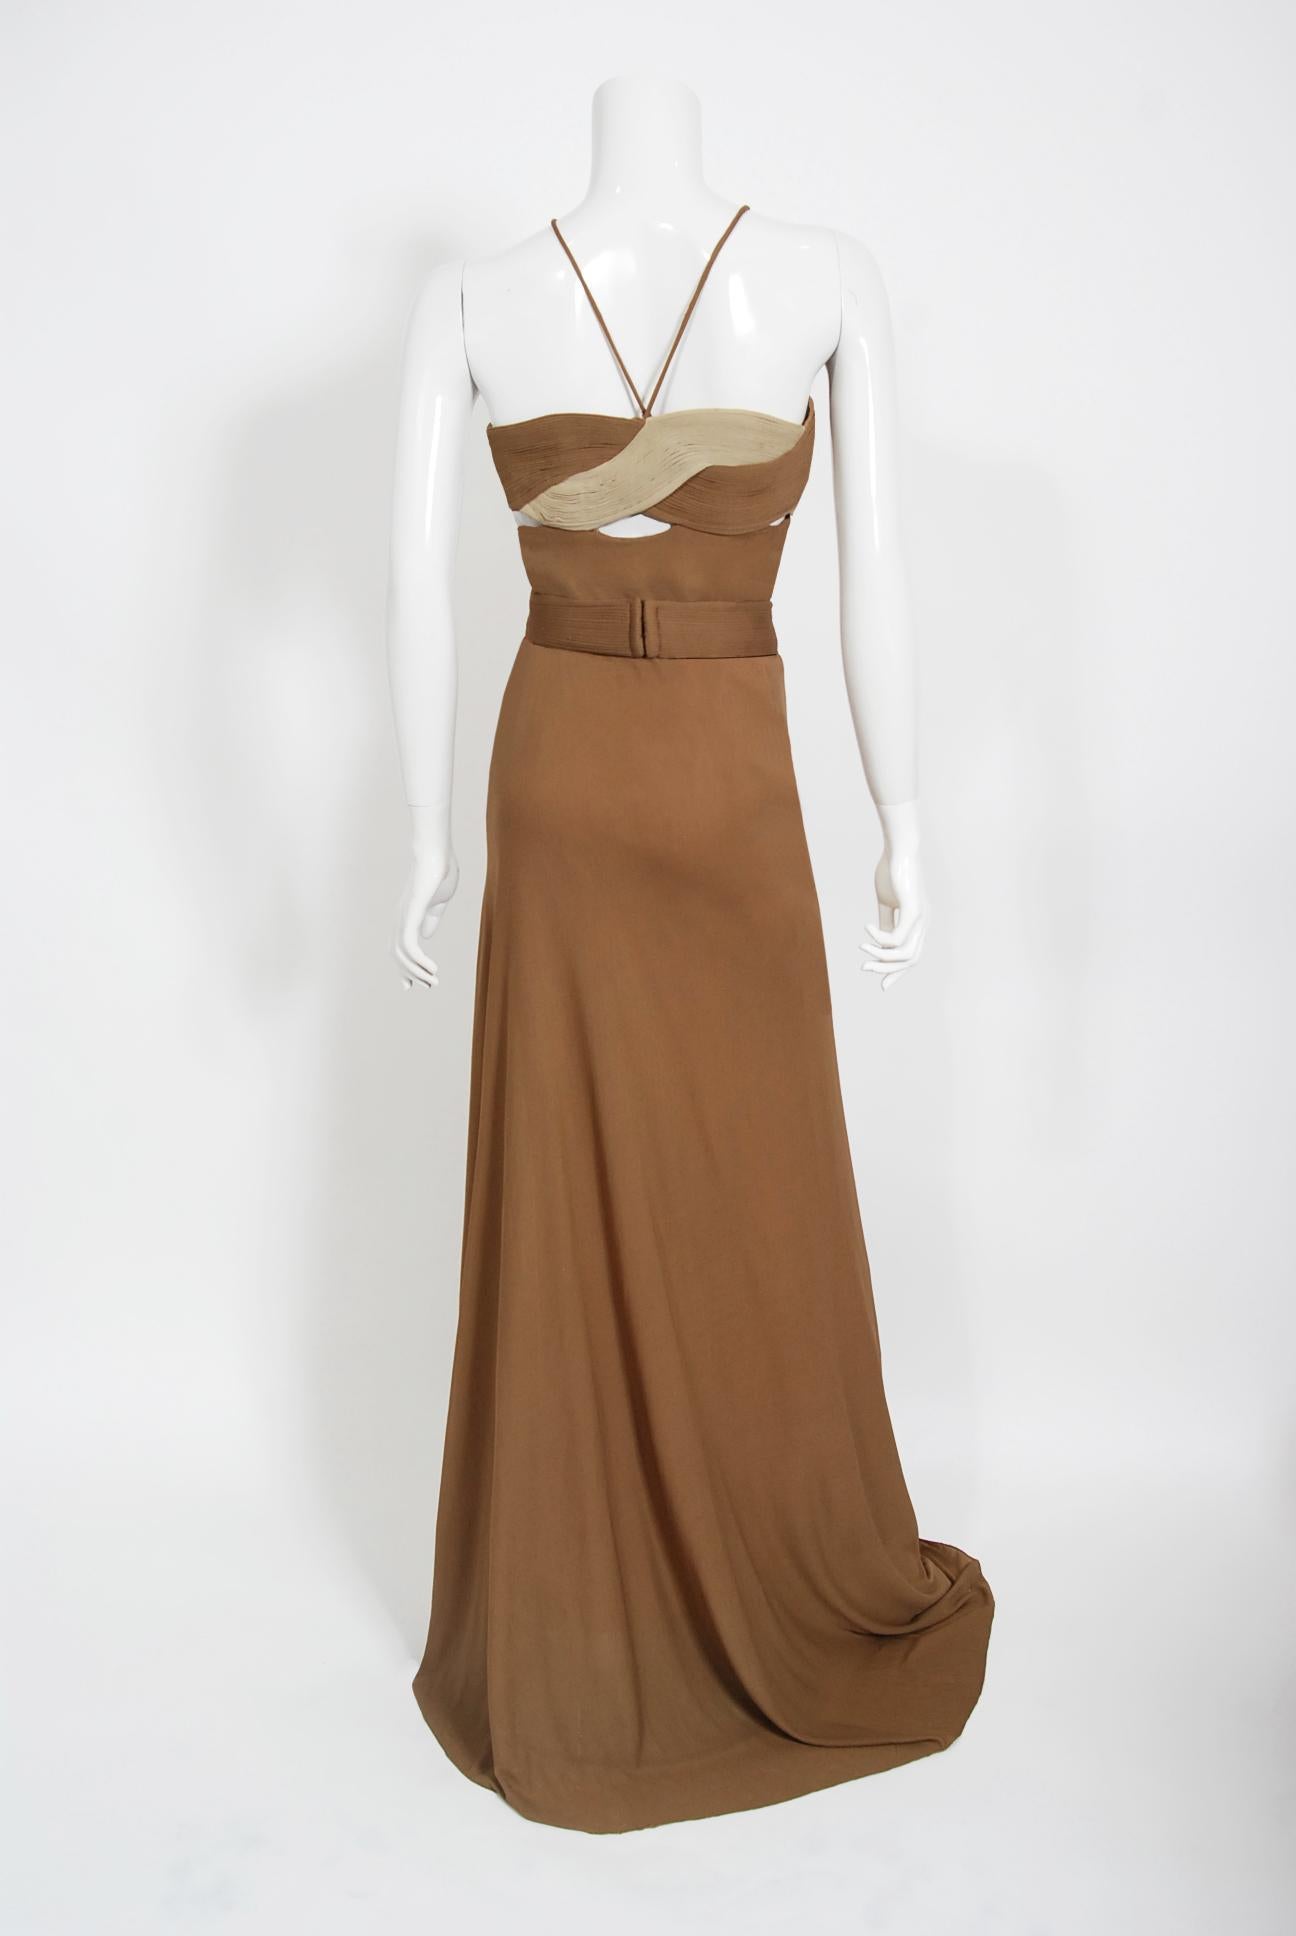 Women's Vintage 1975 Madame Grès Haute Couture Rare Documented Silk-Jersey Cut Out Gown For Sale